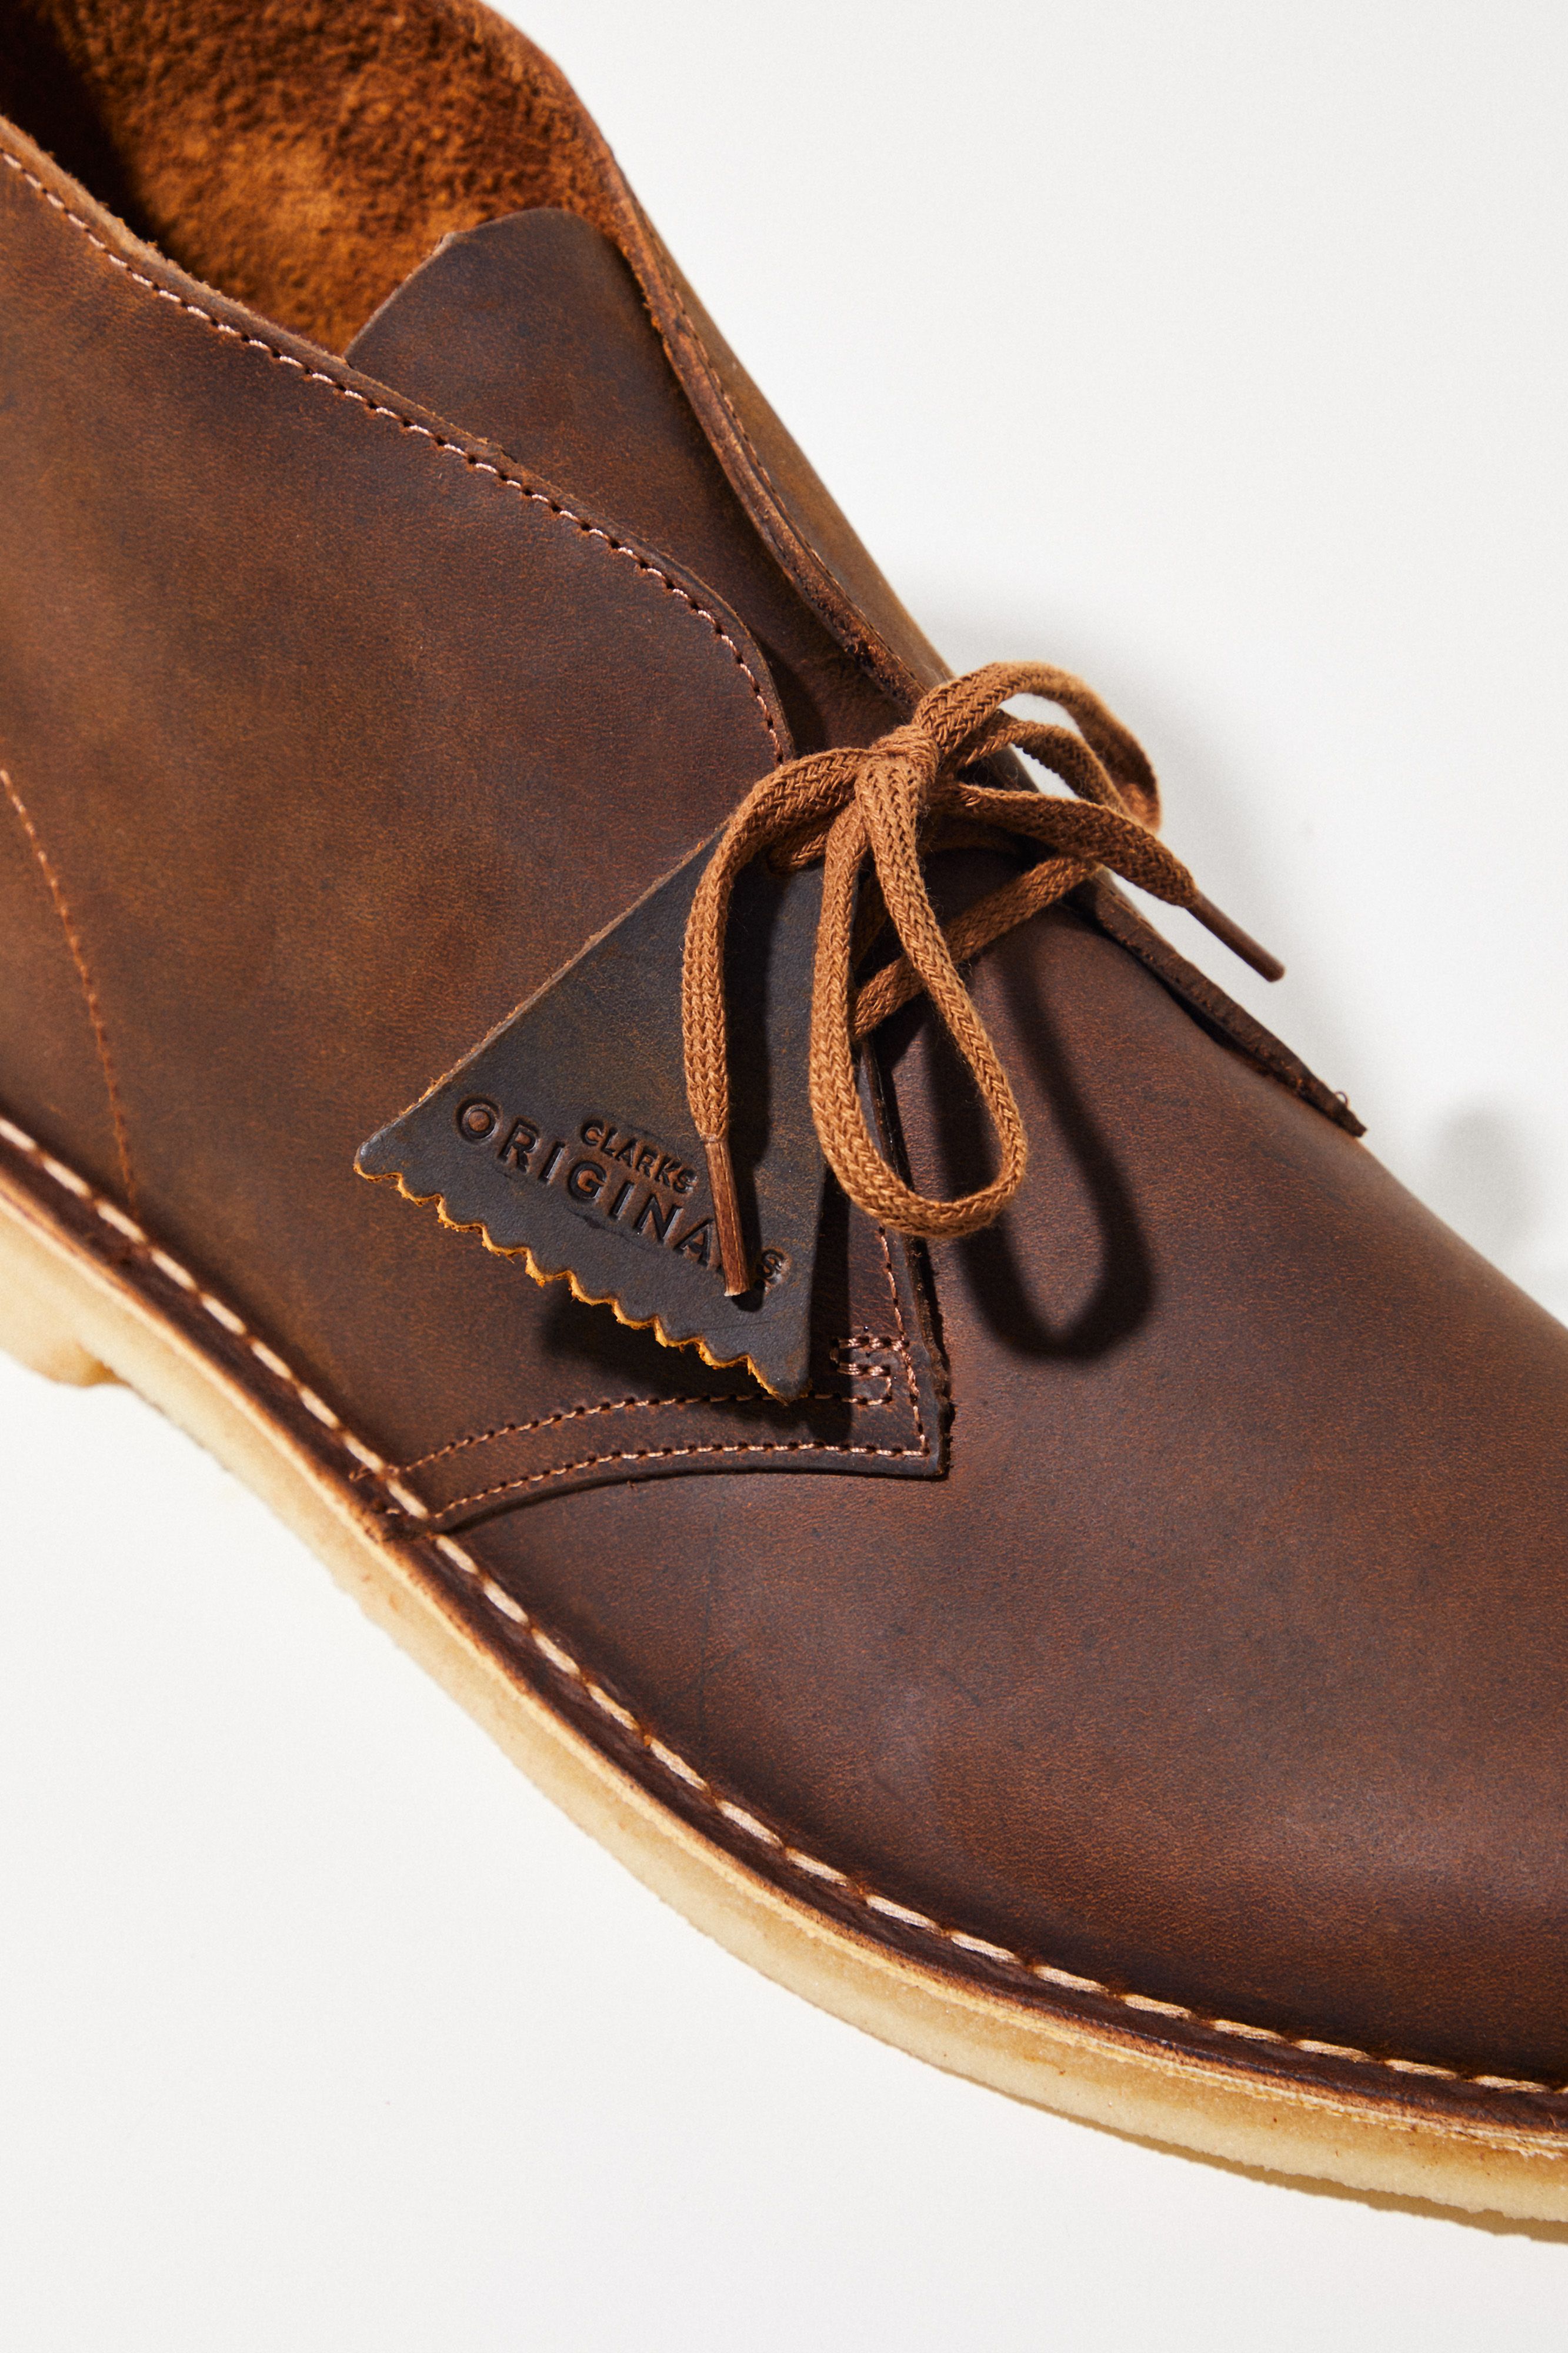 clarks dress shoes review